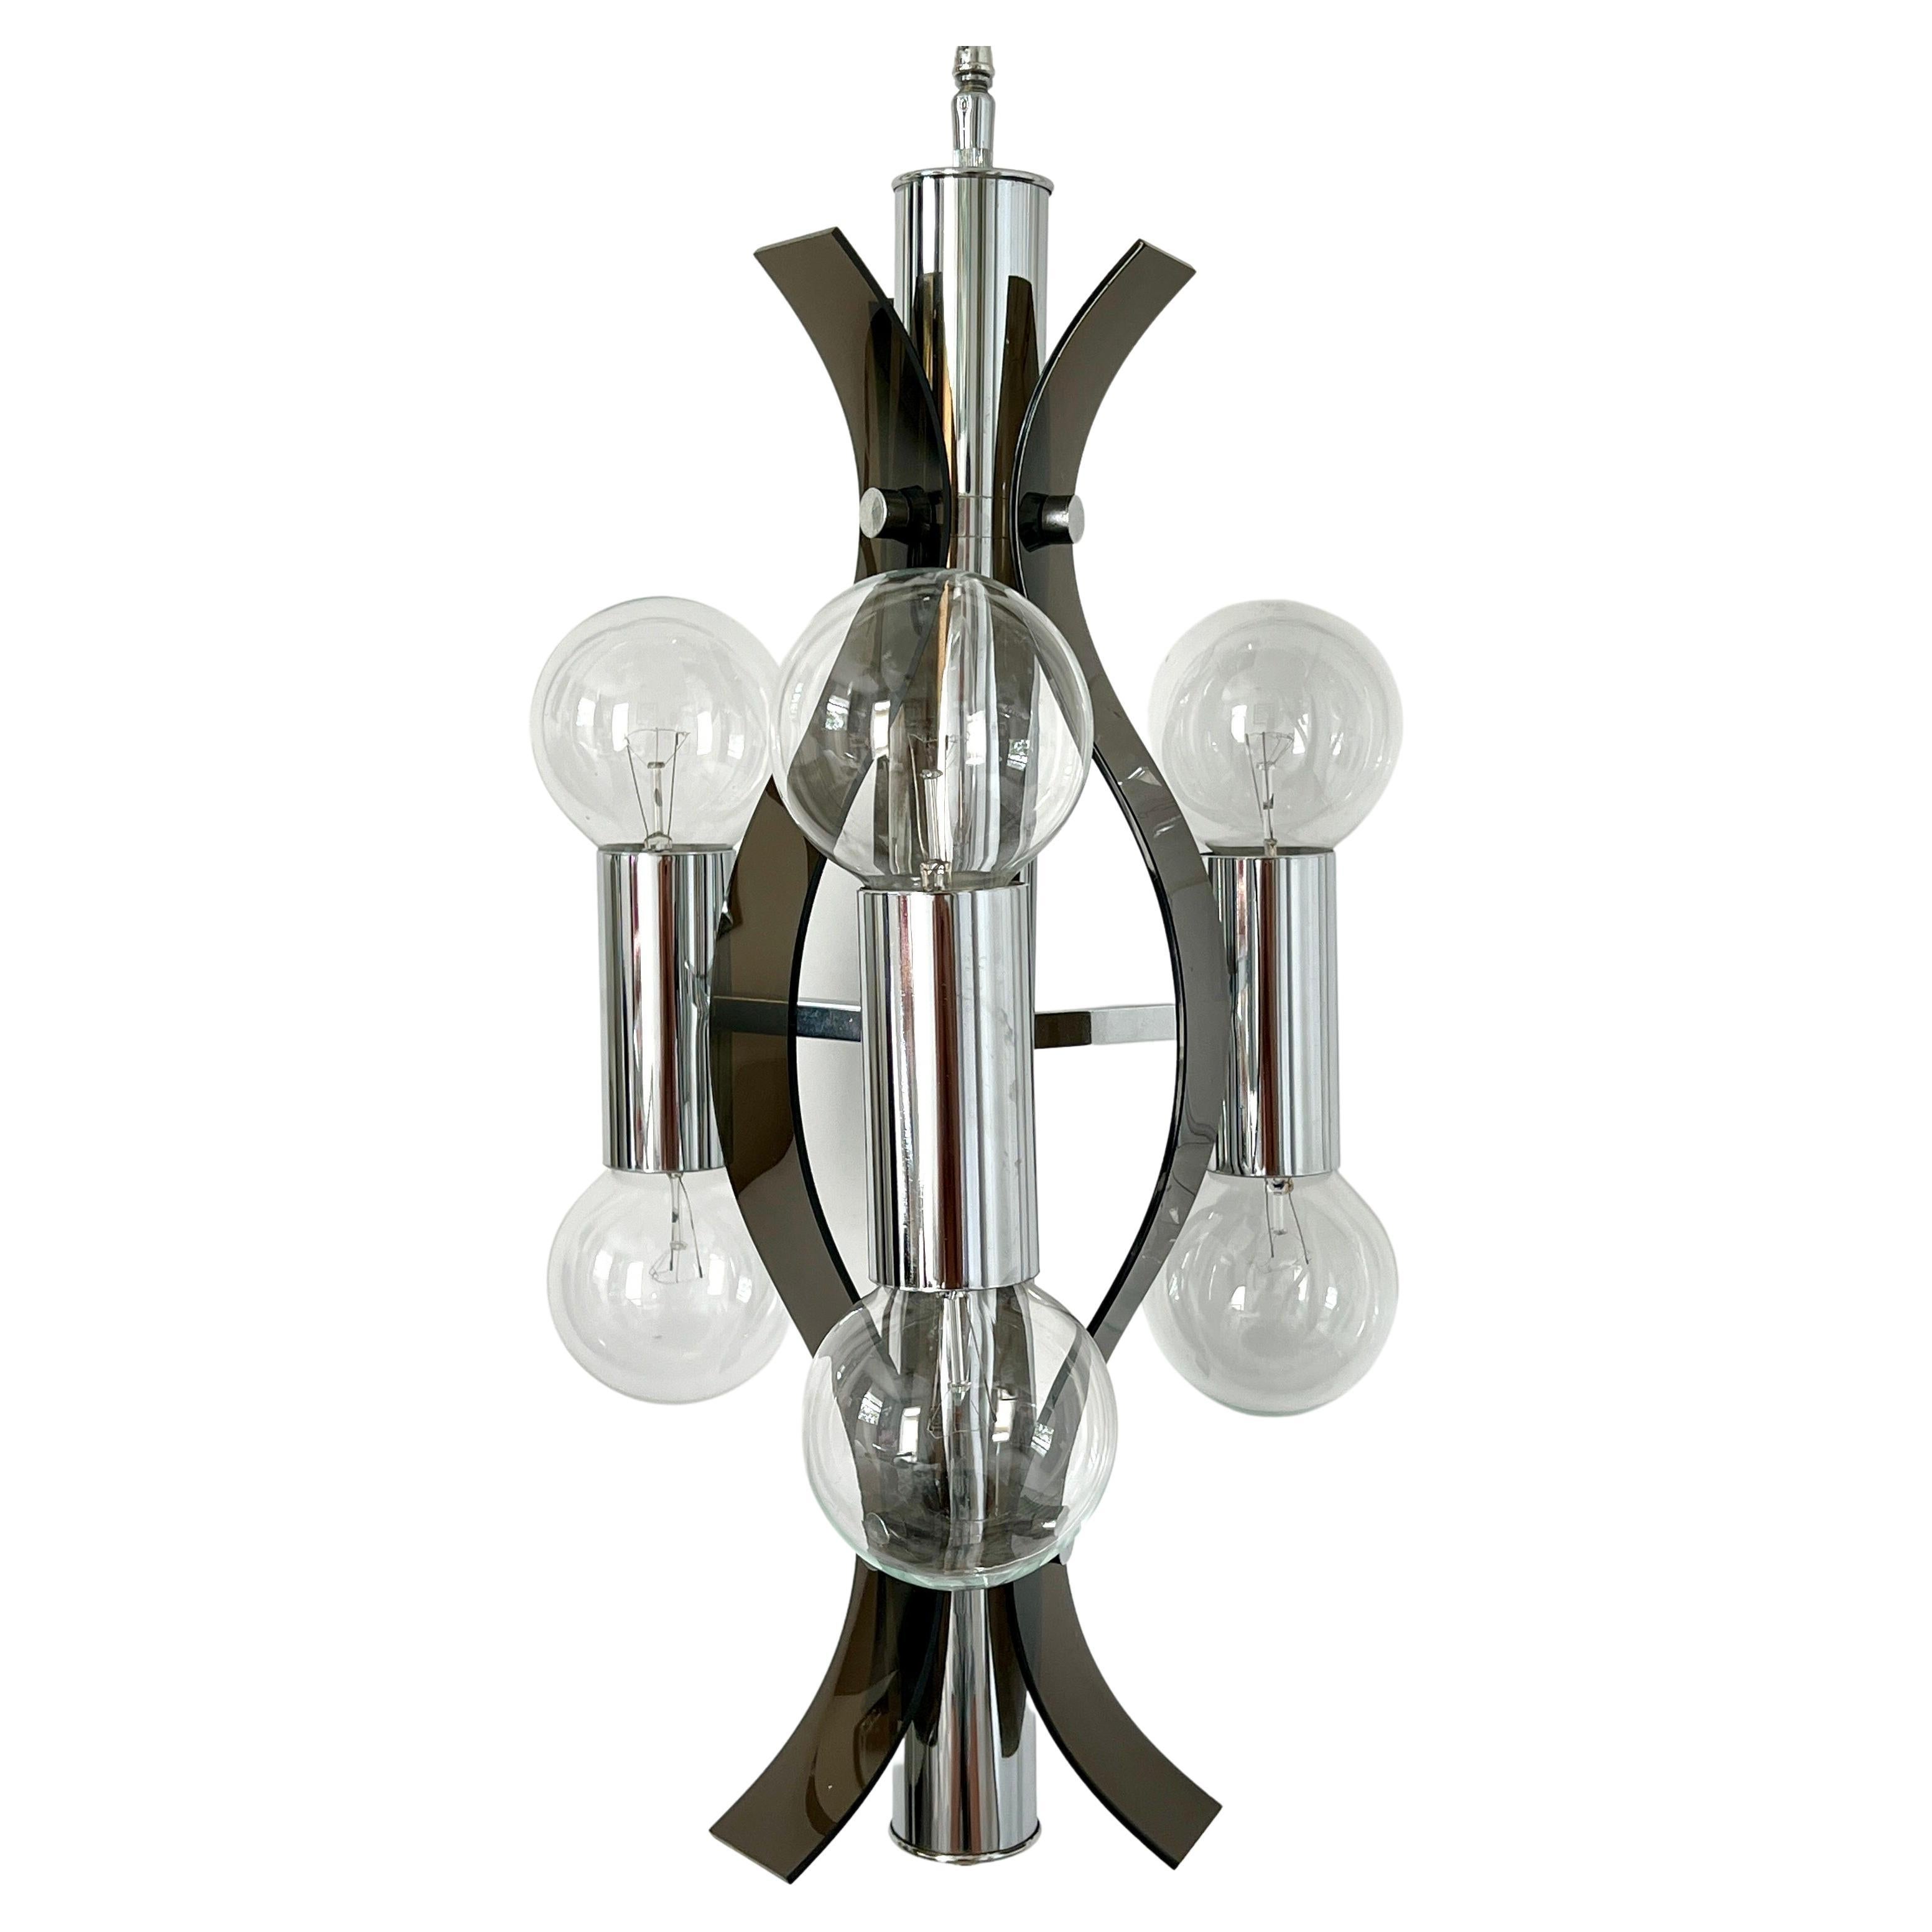 Sculptural Chandelier in Chrome and Smoked Lucite, Robert Sonneman, c. 1970's For Sale